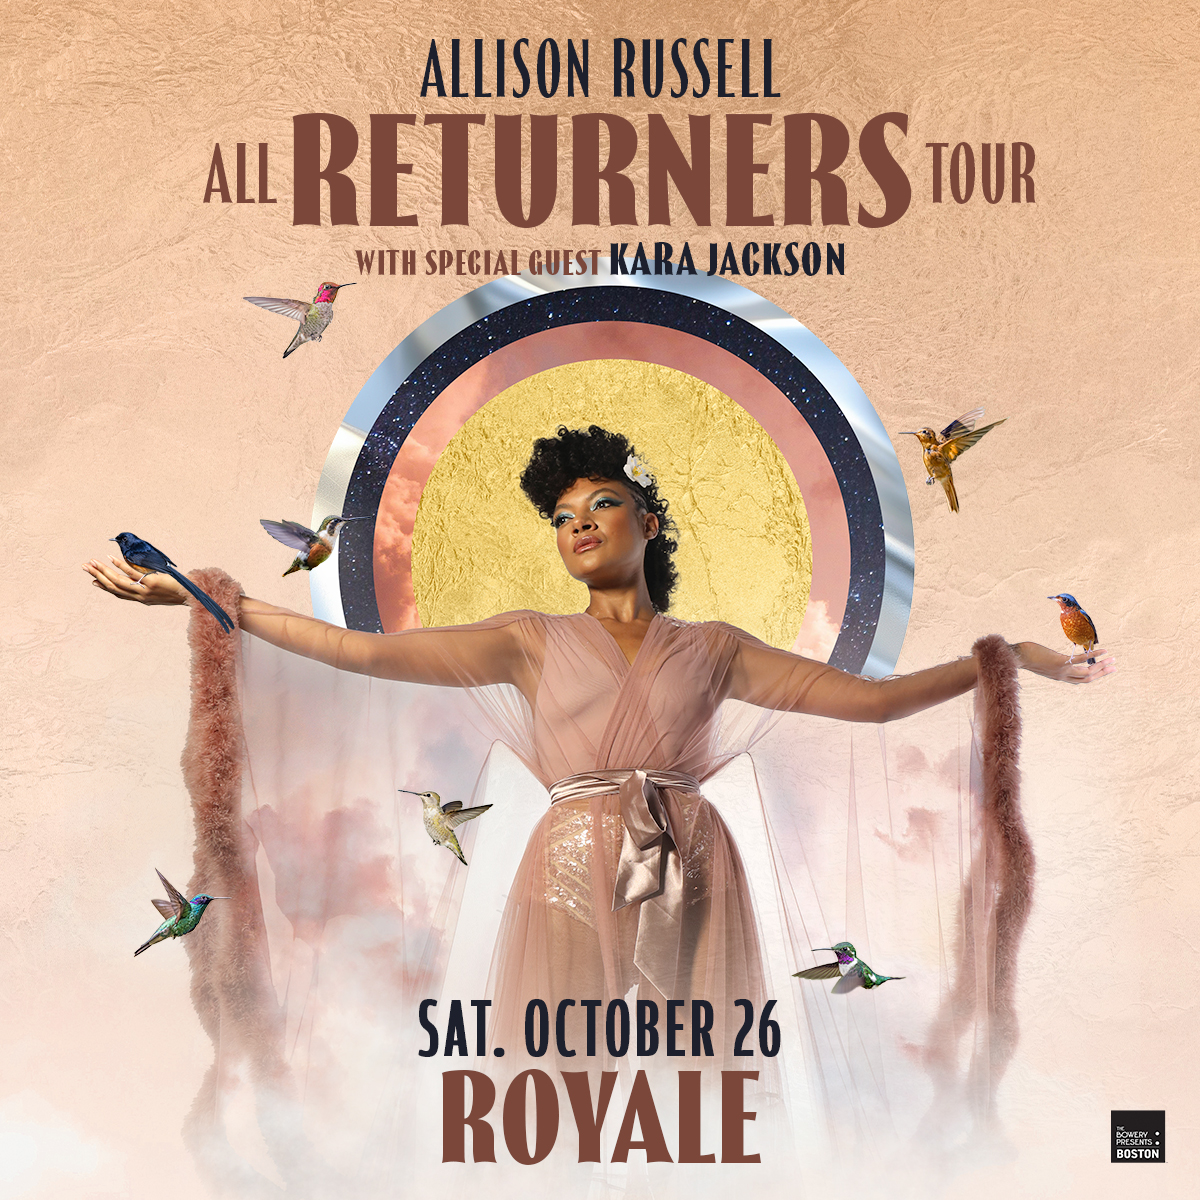 JUST ANNOUNCED! Allison Russell (@outsidechild13) is coming to @RoyaleBoston on Saturday, October 26 with Kara Jackson (@fridahalo) 🚨 Tickets go on sale Friday at 10am // axs.com/events/561817/…